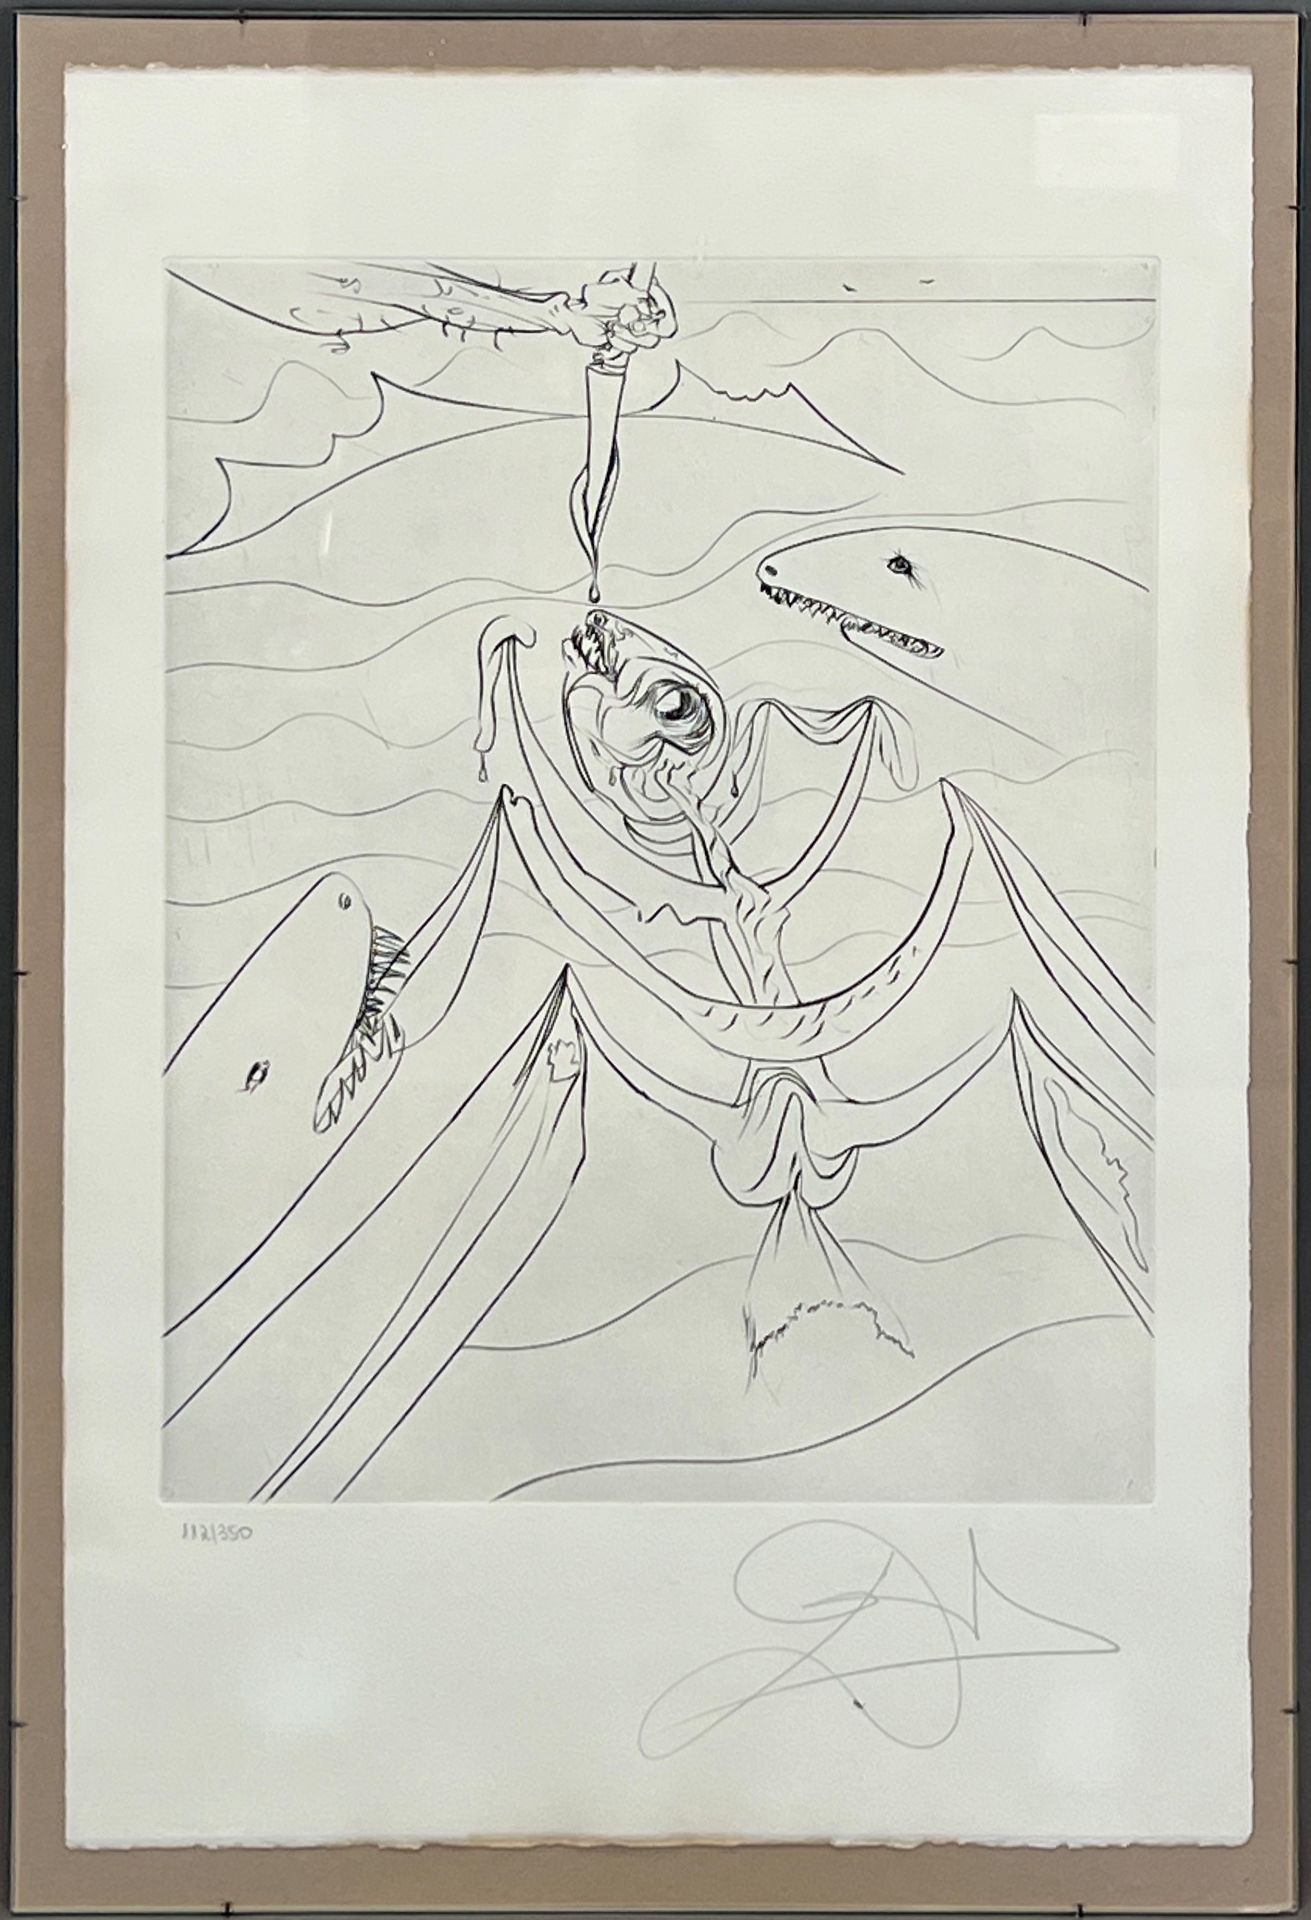 Salvador DALI (1904 - 1989). From the series "Hemingway, E. The old man and the sea".